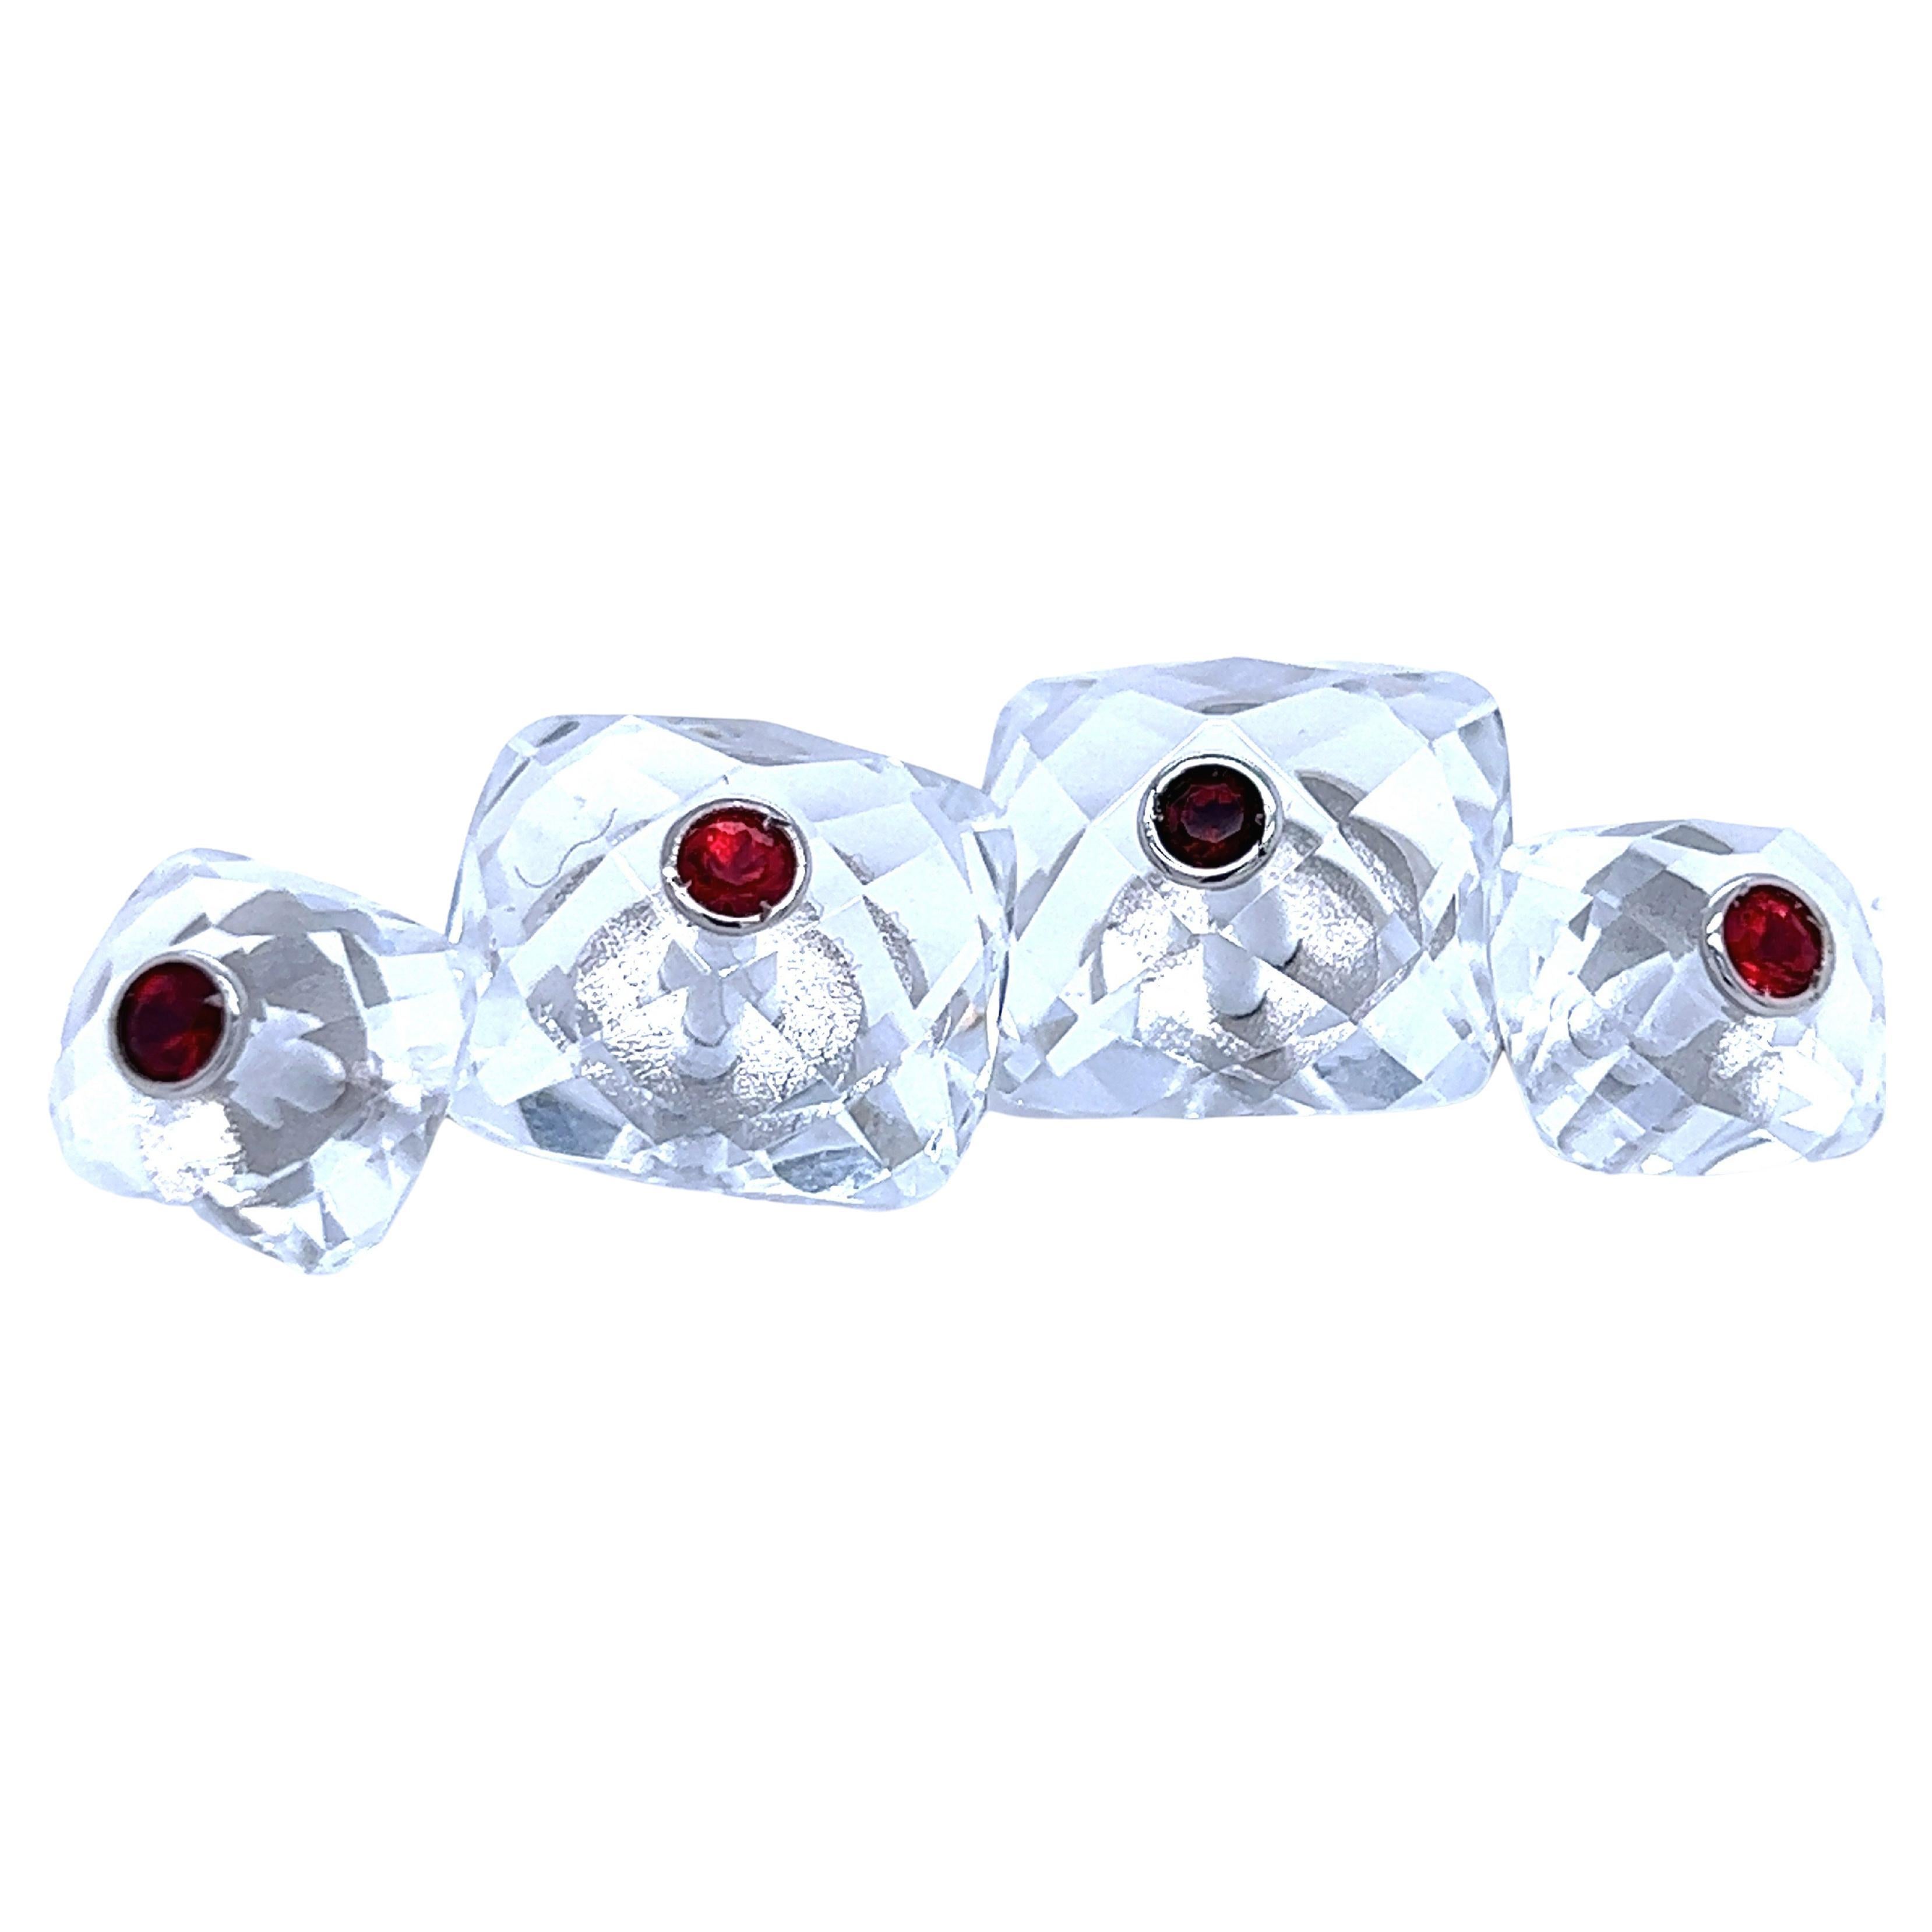 Berca Ruby Inlaid Faceted Rock Crystal Quartz Setting White Gold Cufflinks For Sale